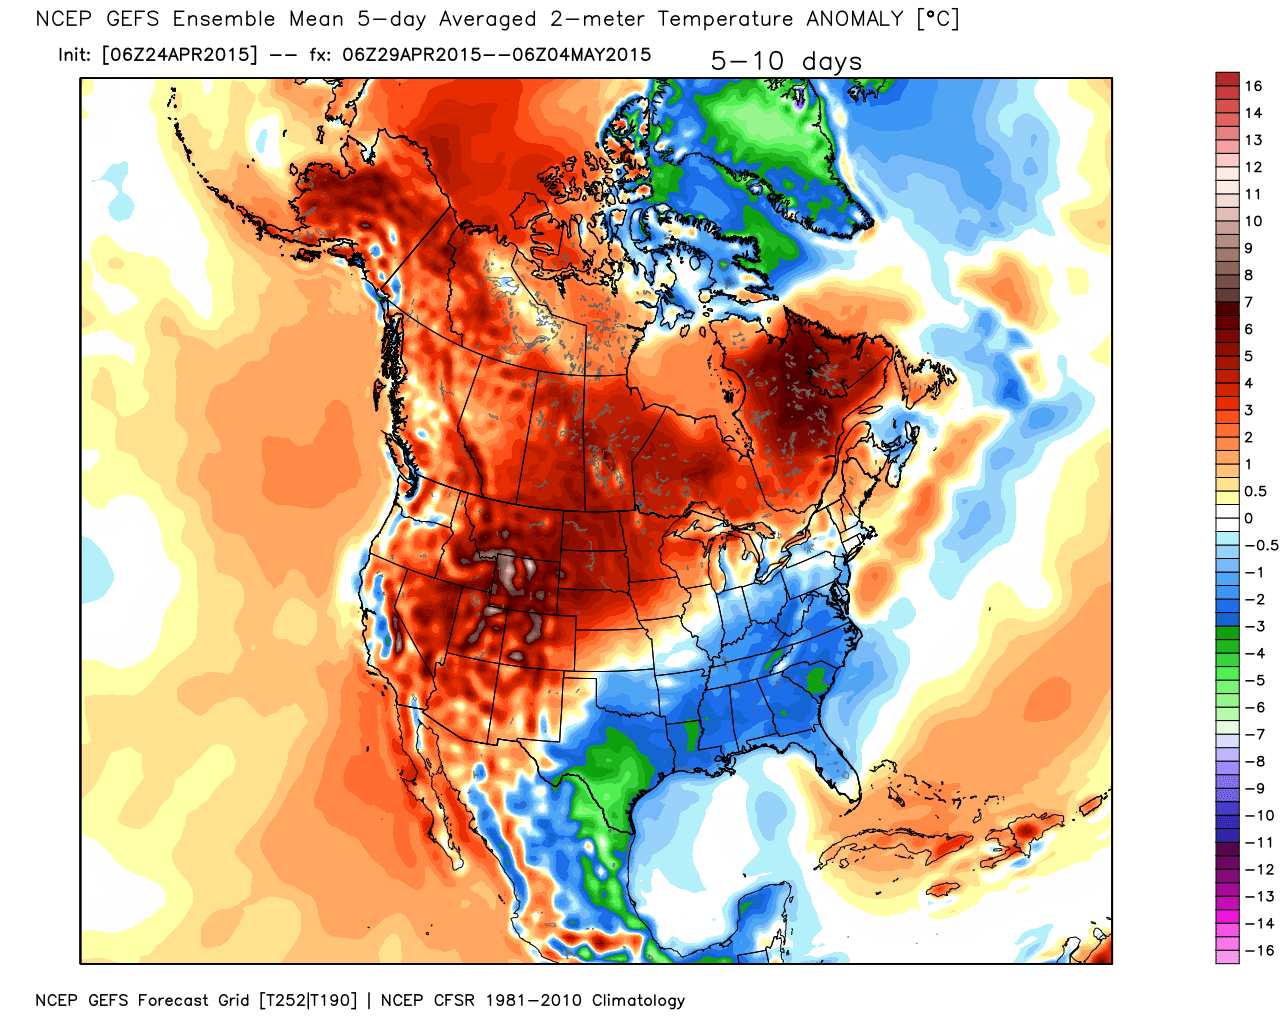 Temperature Anomalies from Average for the period of April 29 through May 4 